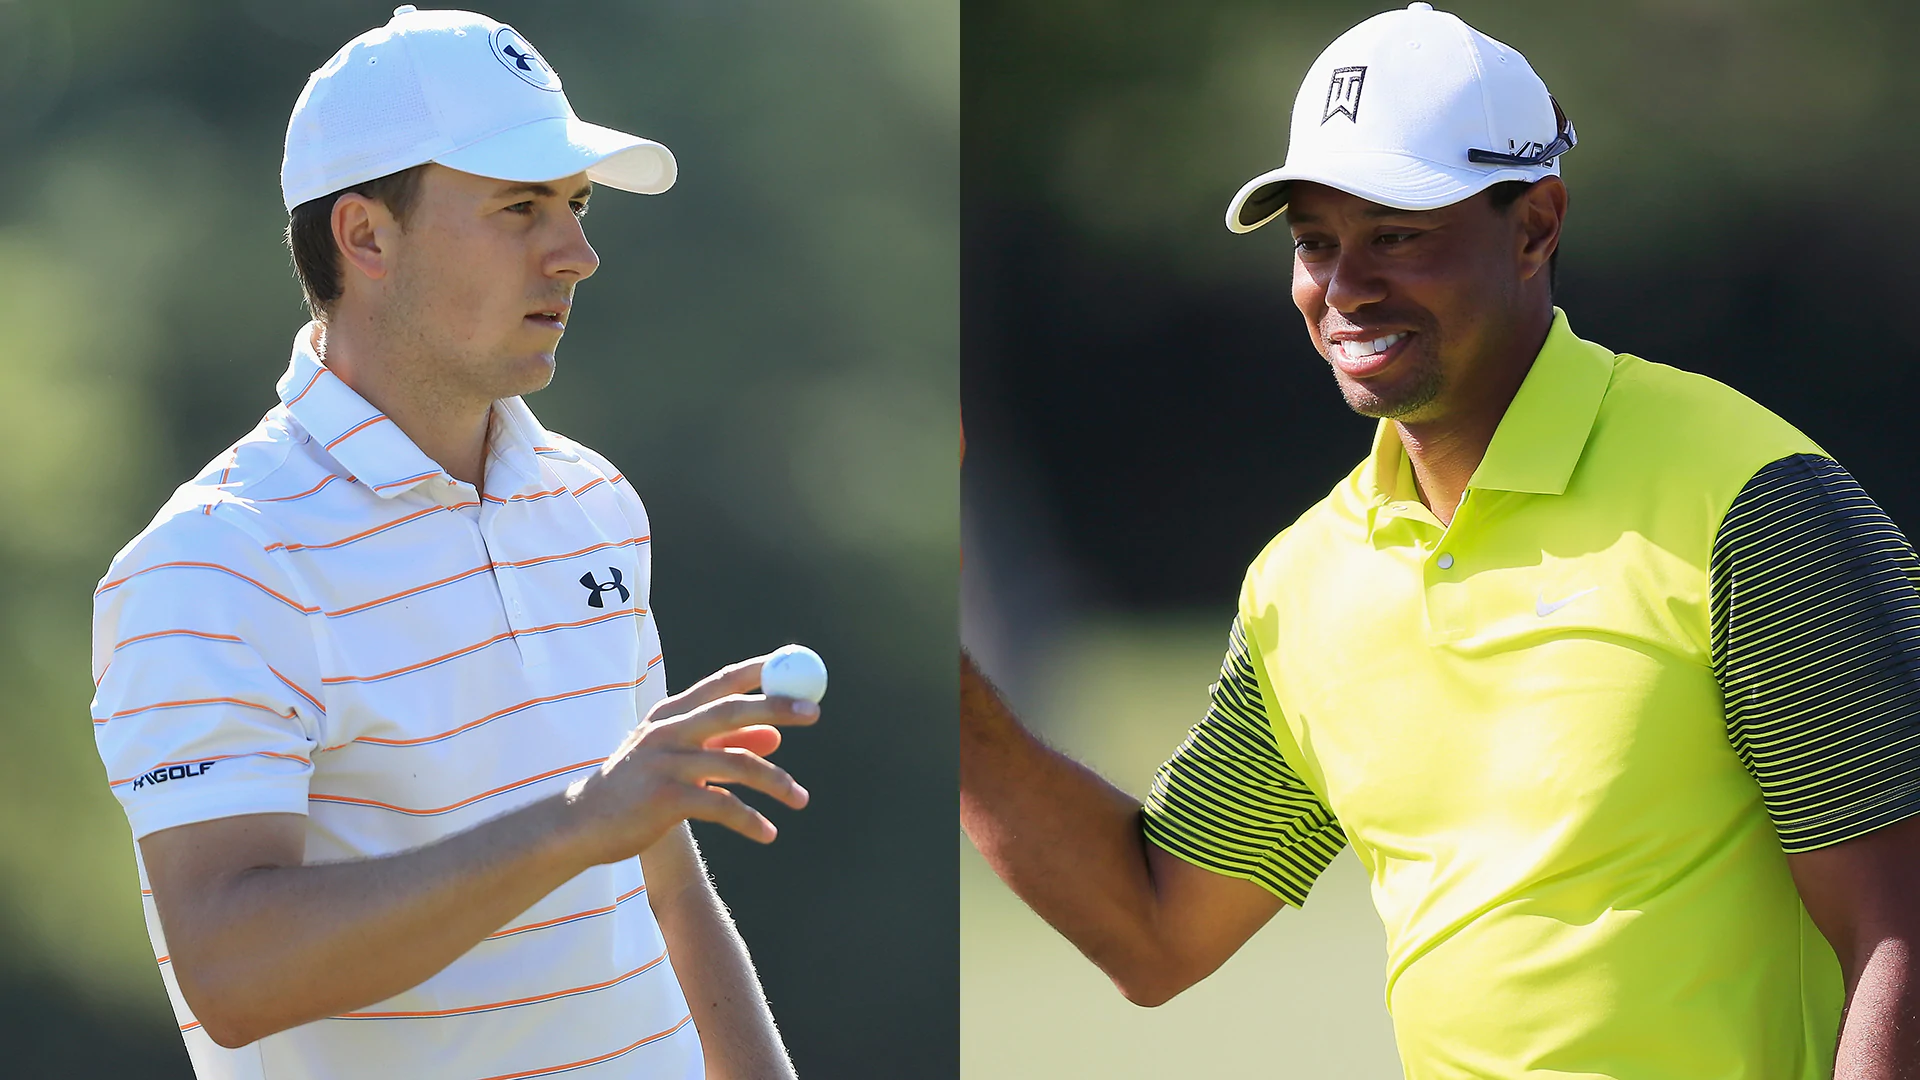 Watch: Spieth, Woods have both made 91-foot putts